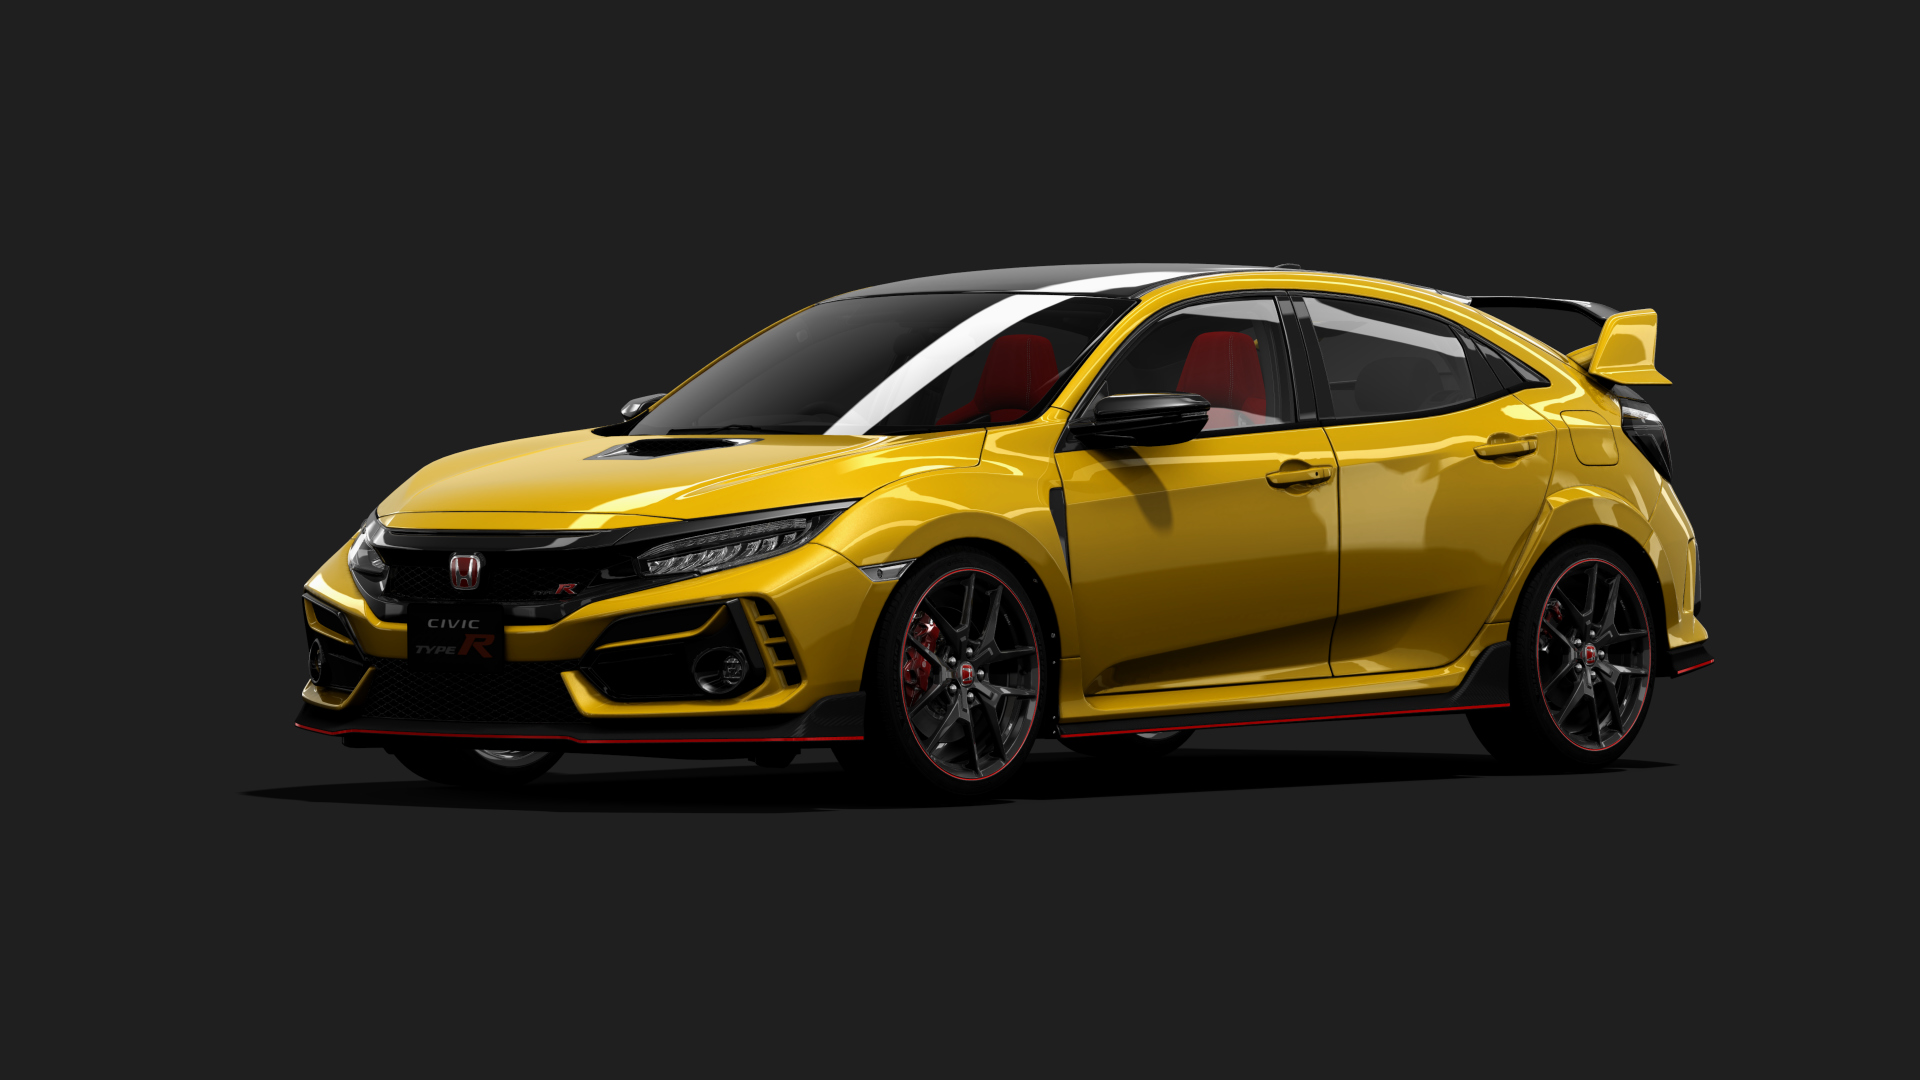 Honda Civic Type R FK8 Limited Edition Preview Image